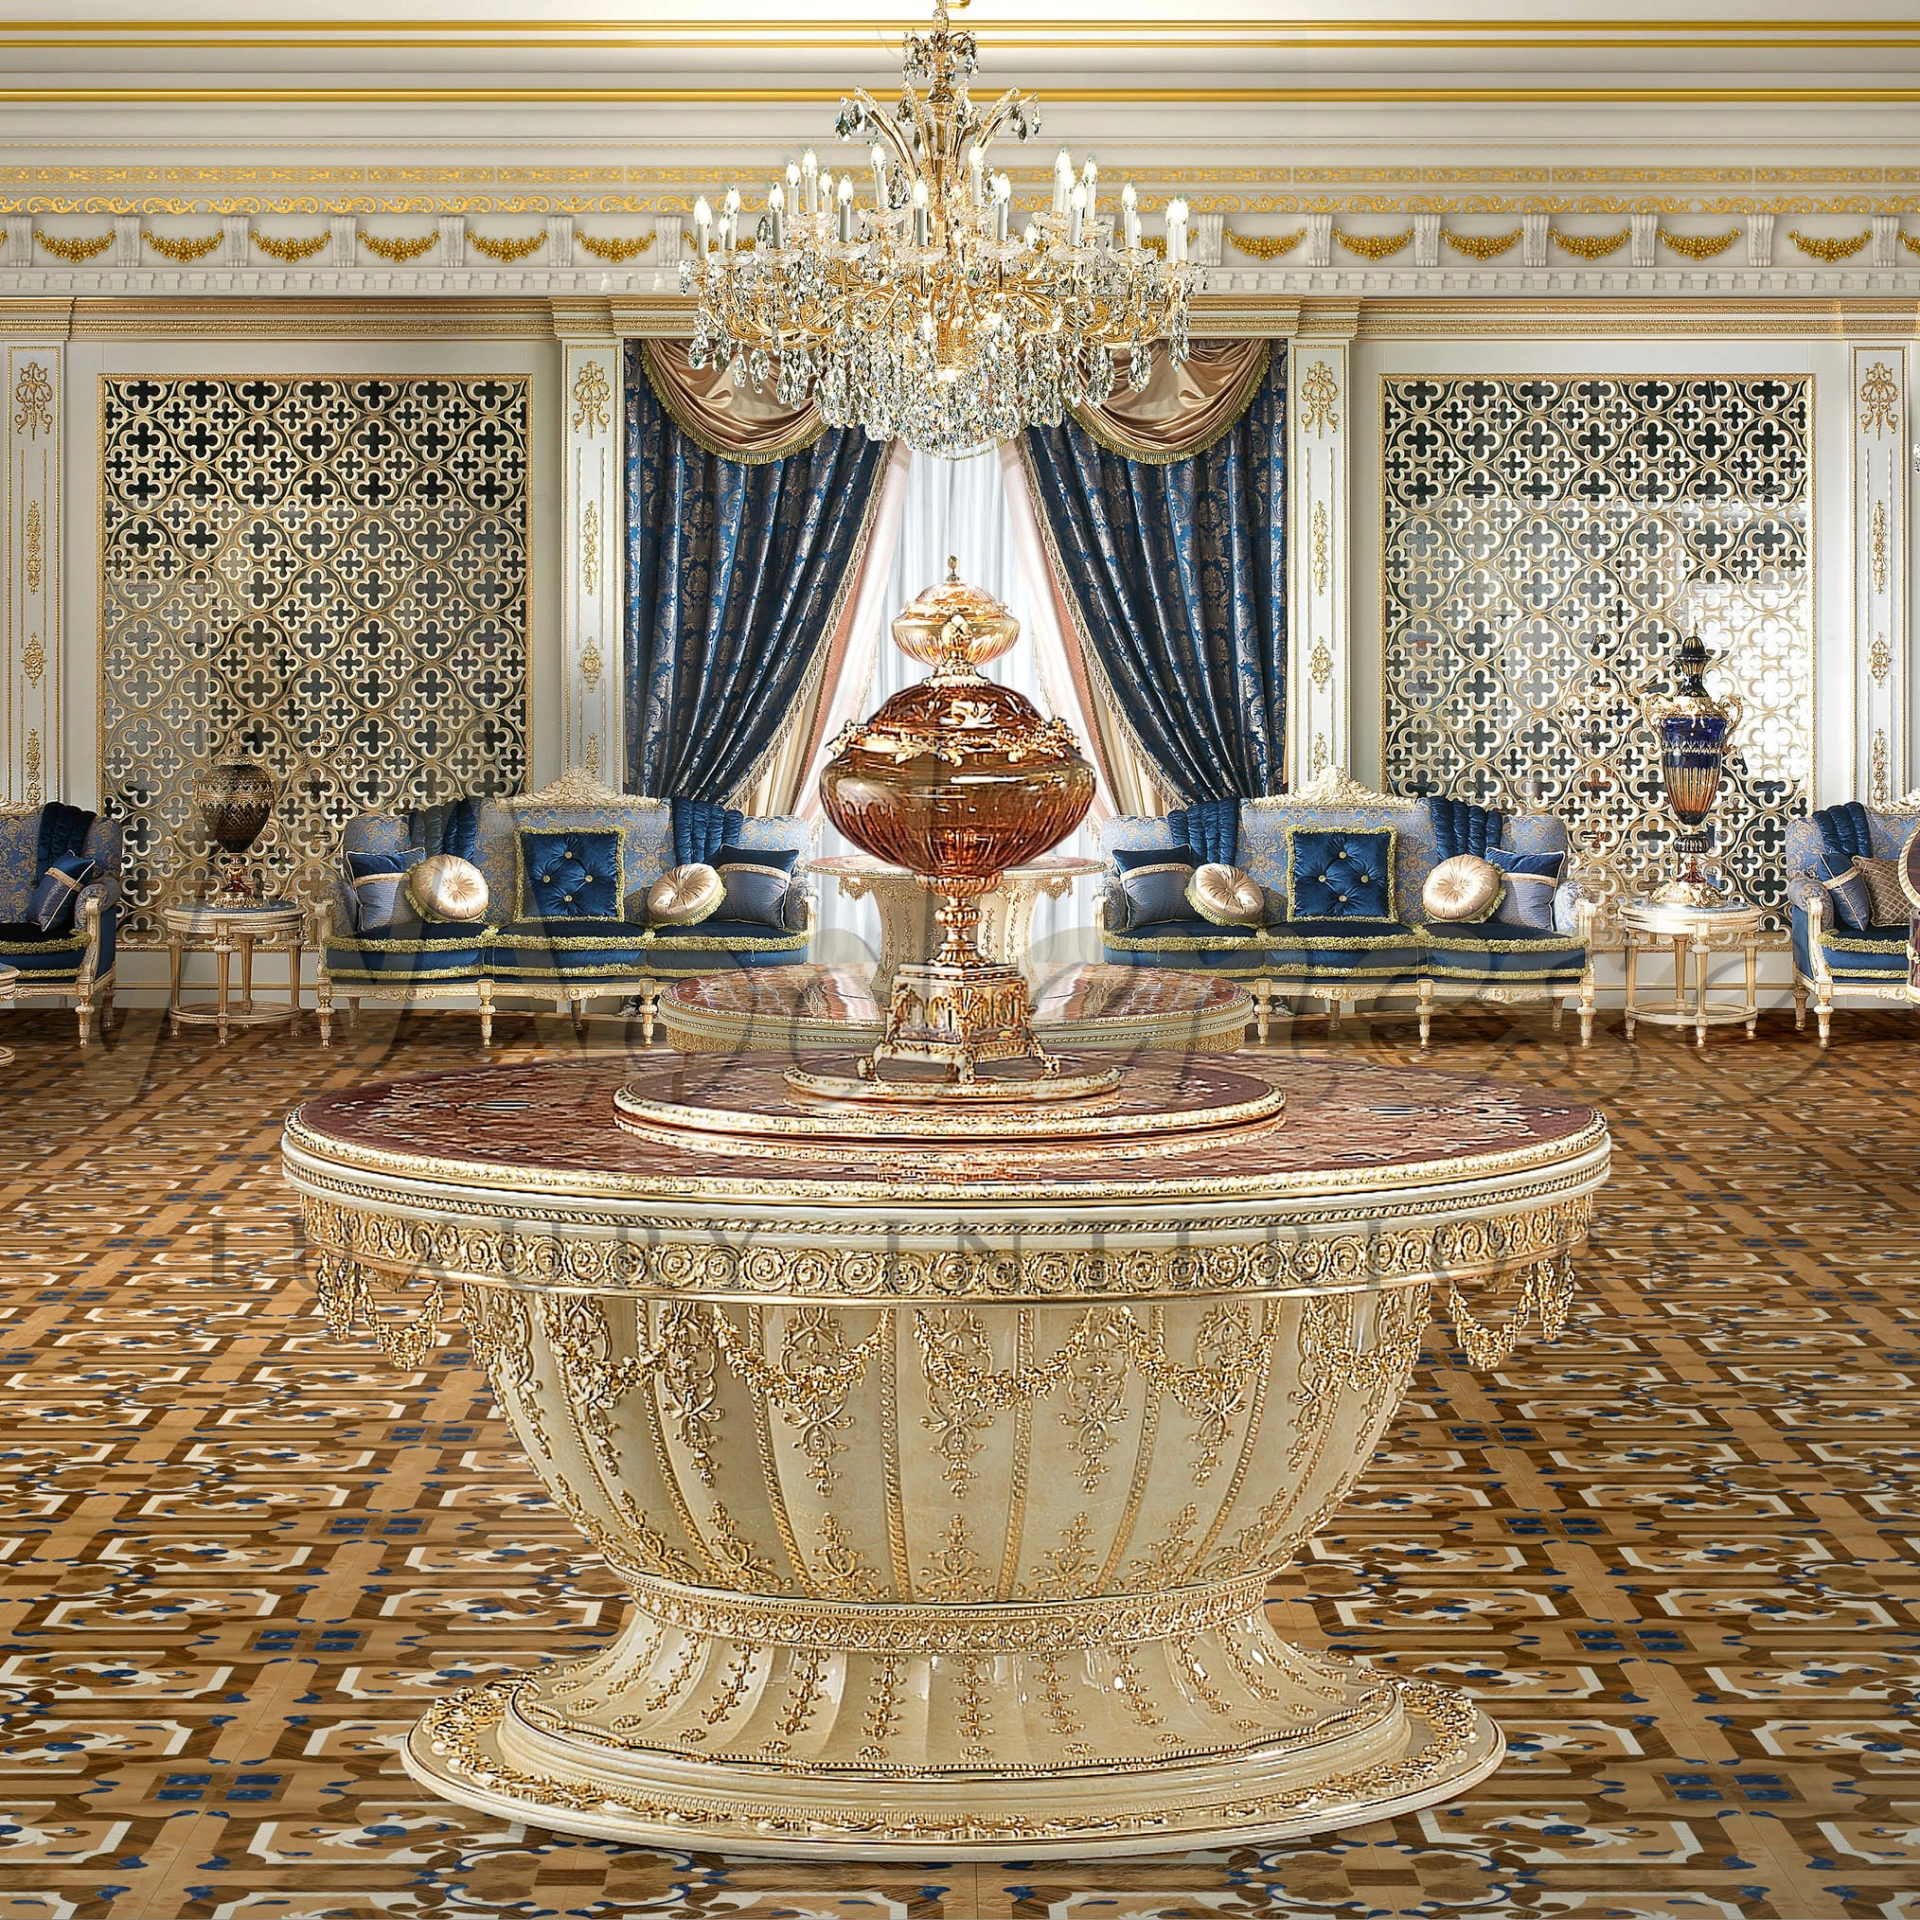 Make a Statement with Our Royal Grand Entrance Table